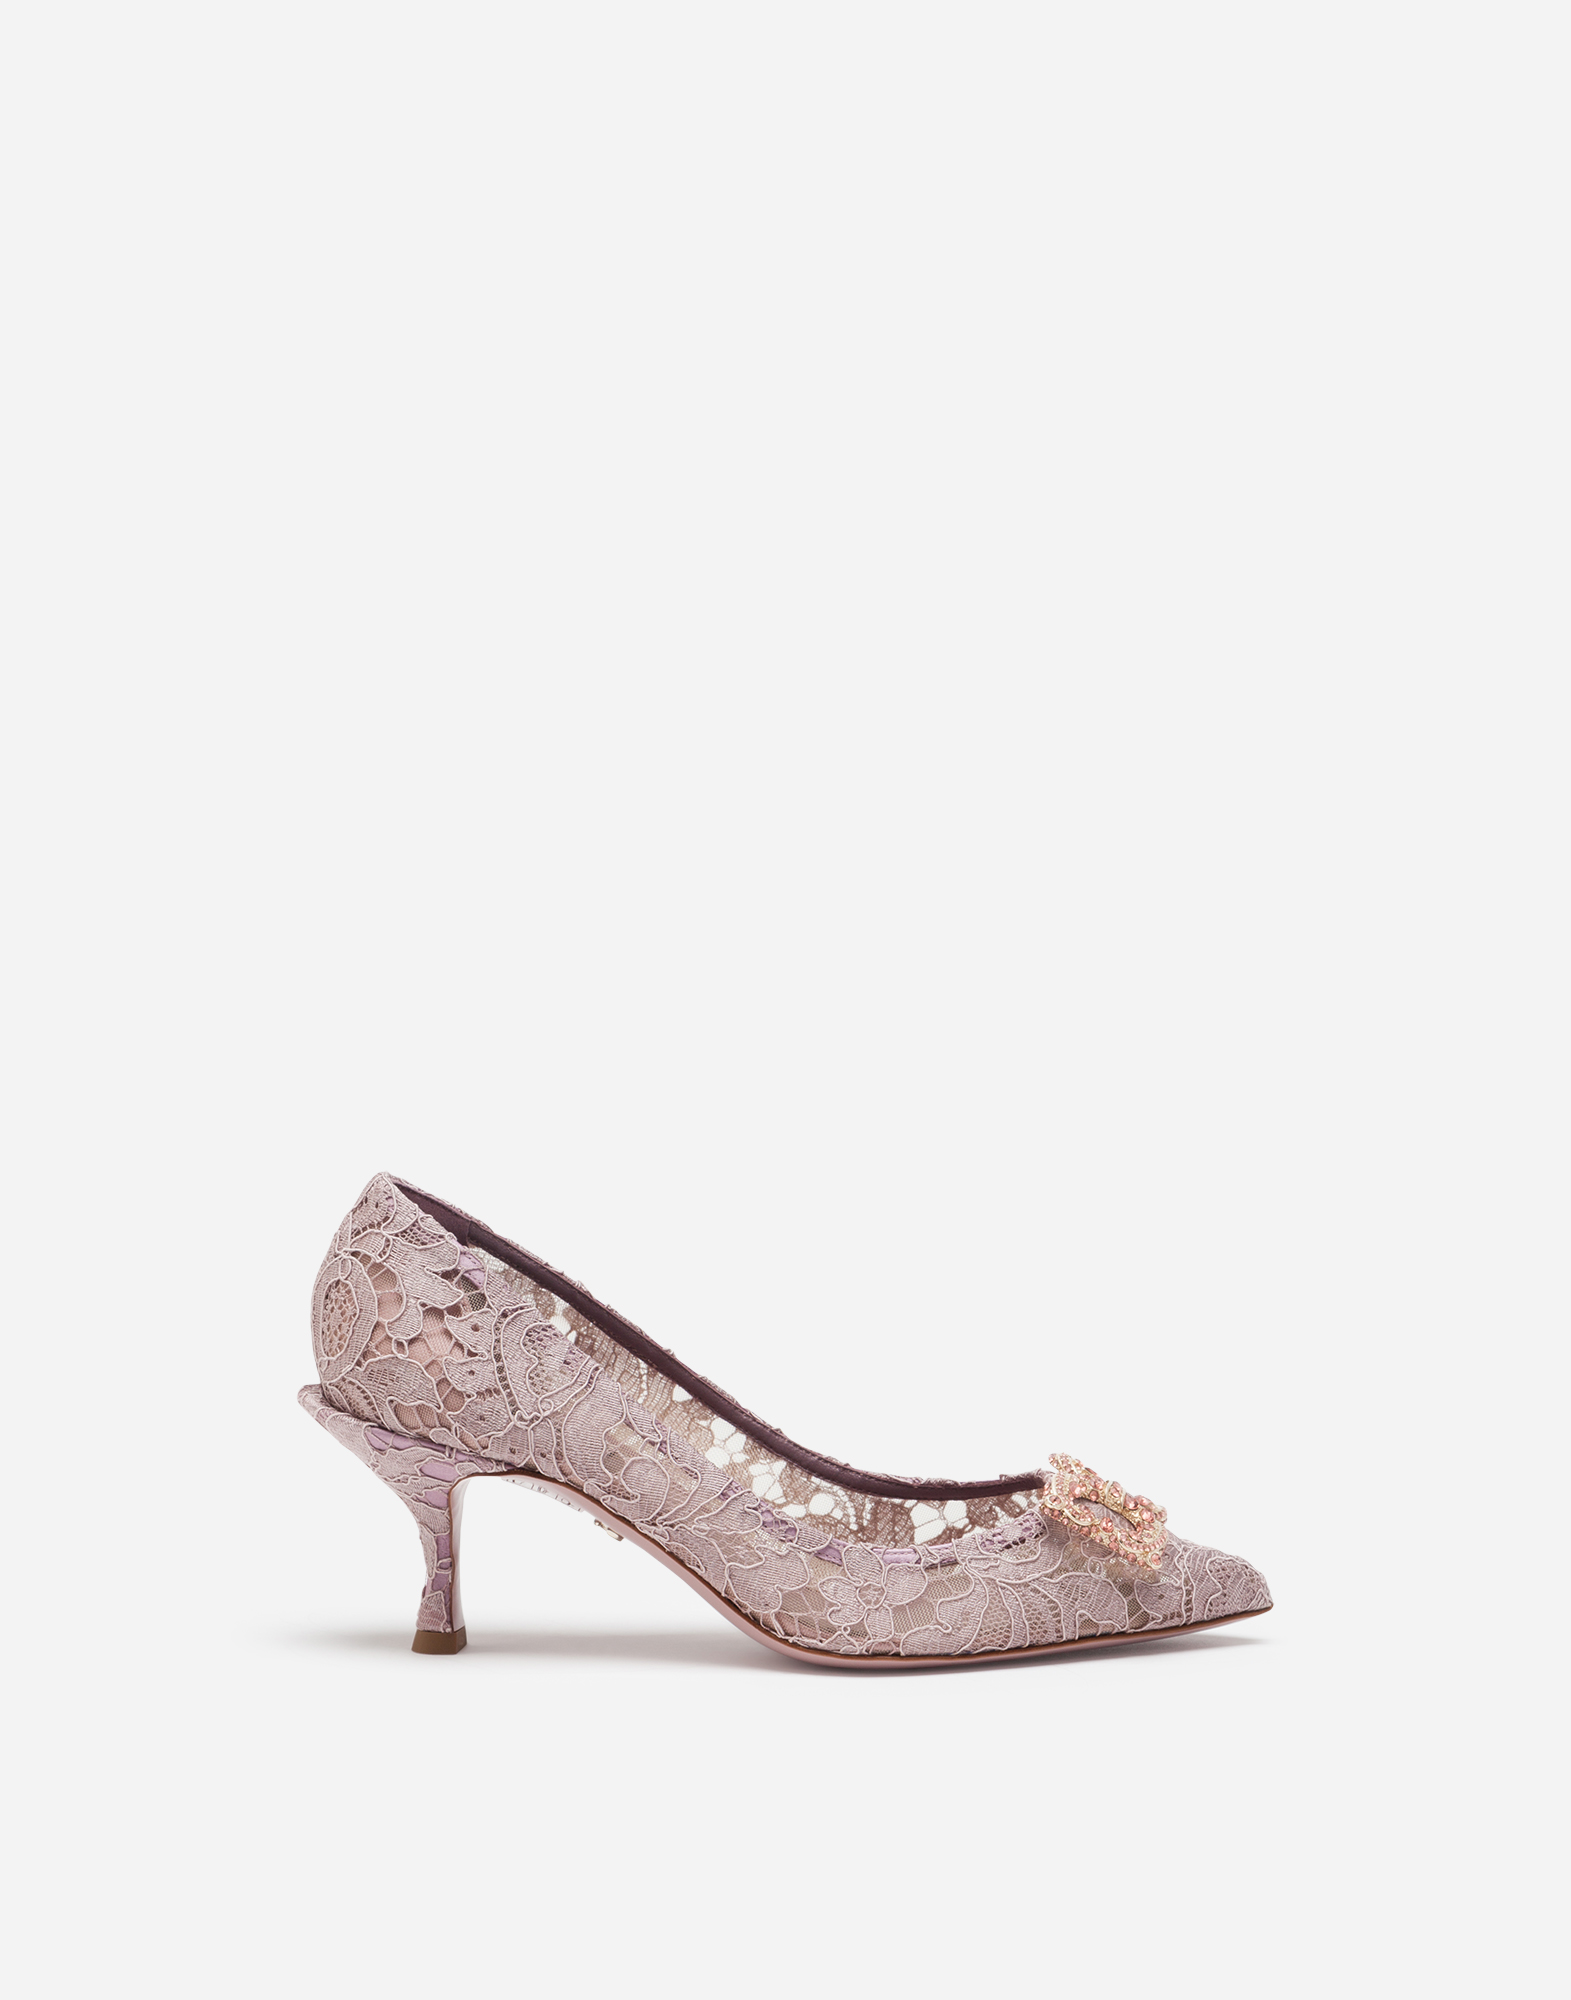 Taormina lace pumps with DG Amore logo in Pink